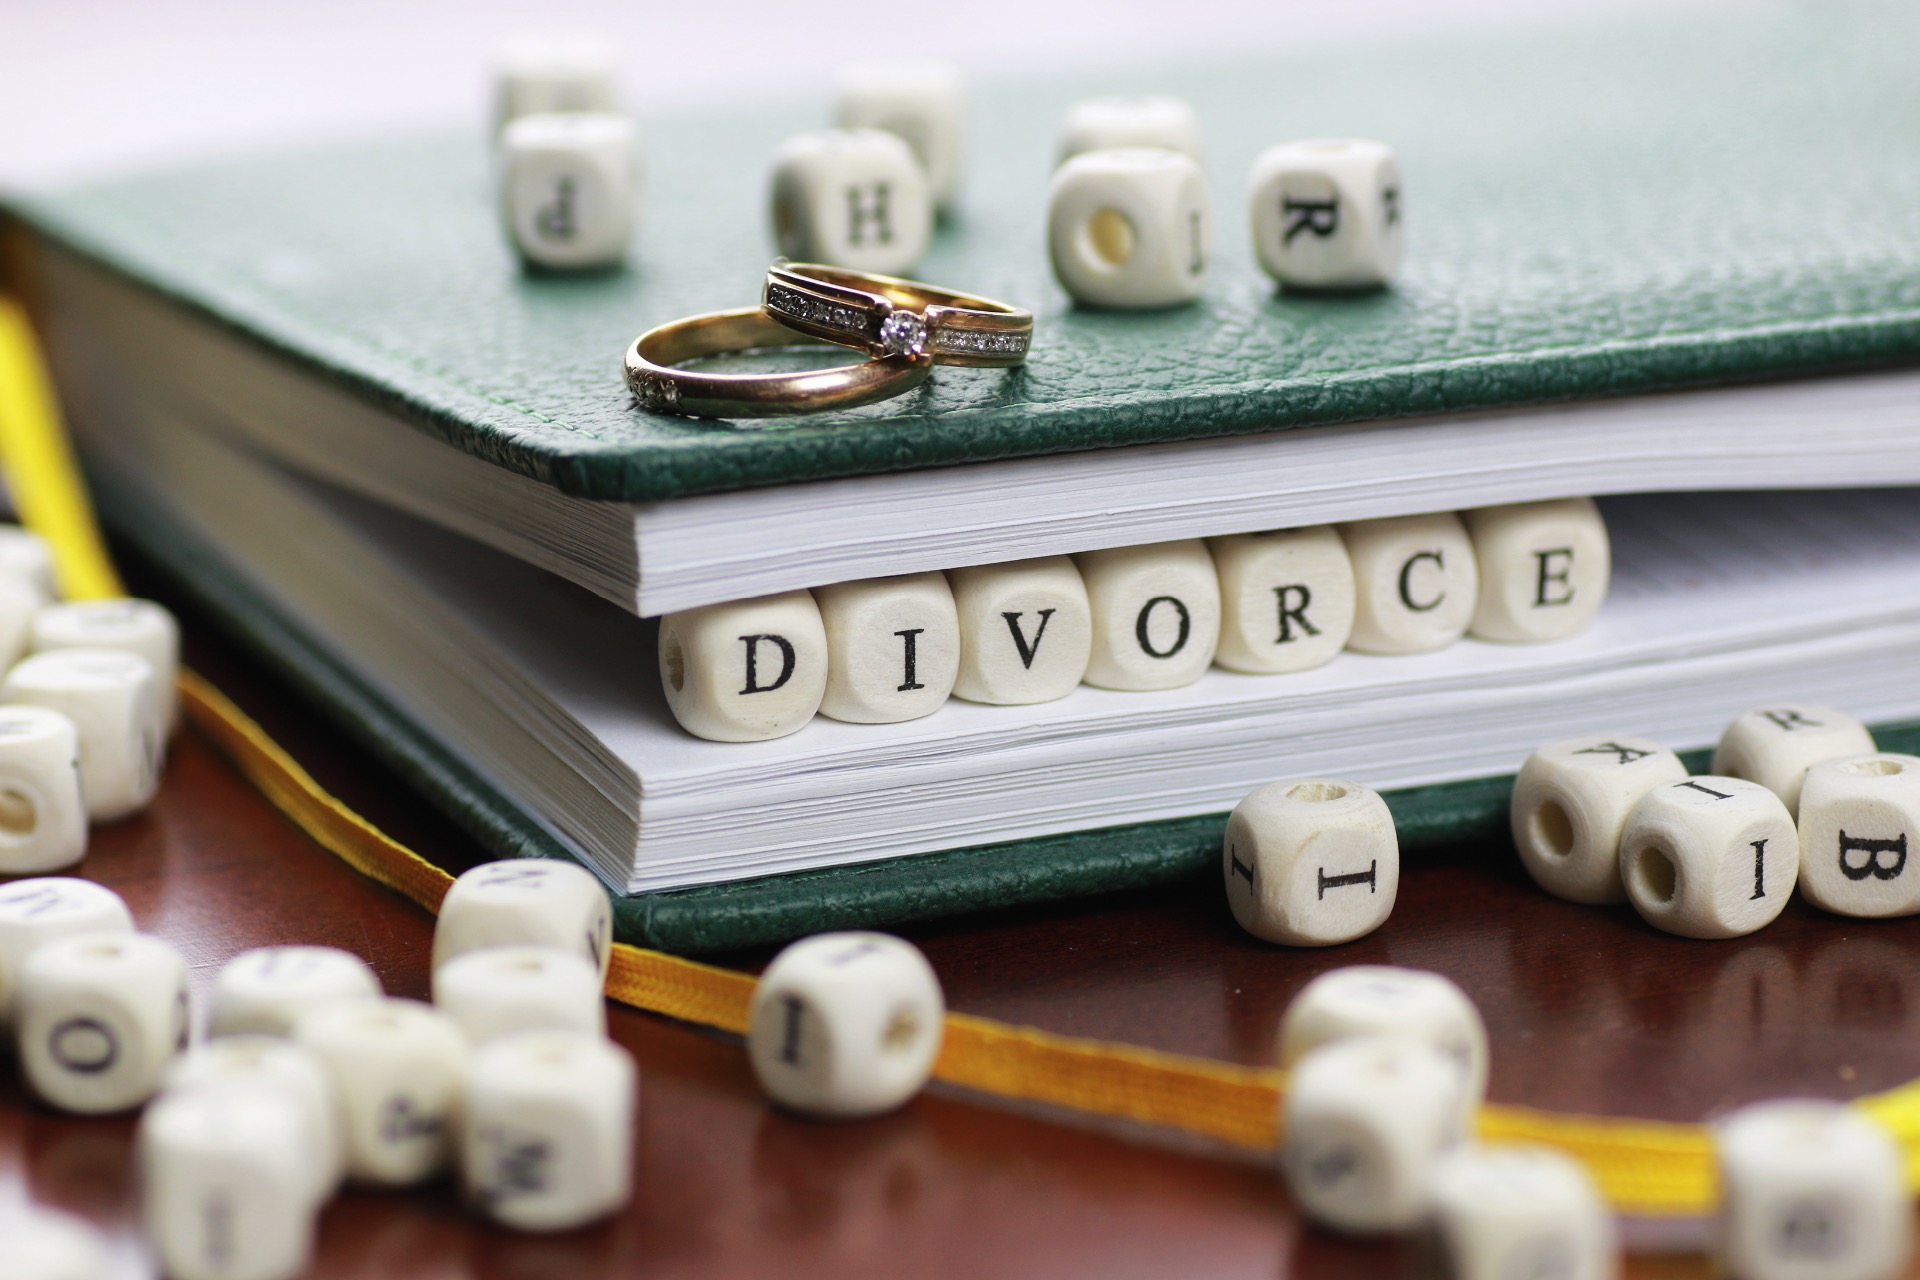 Divorce spelled out in Scrabble Letters.